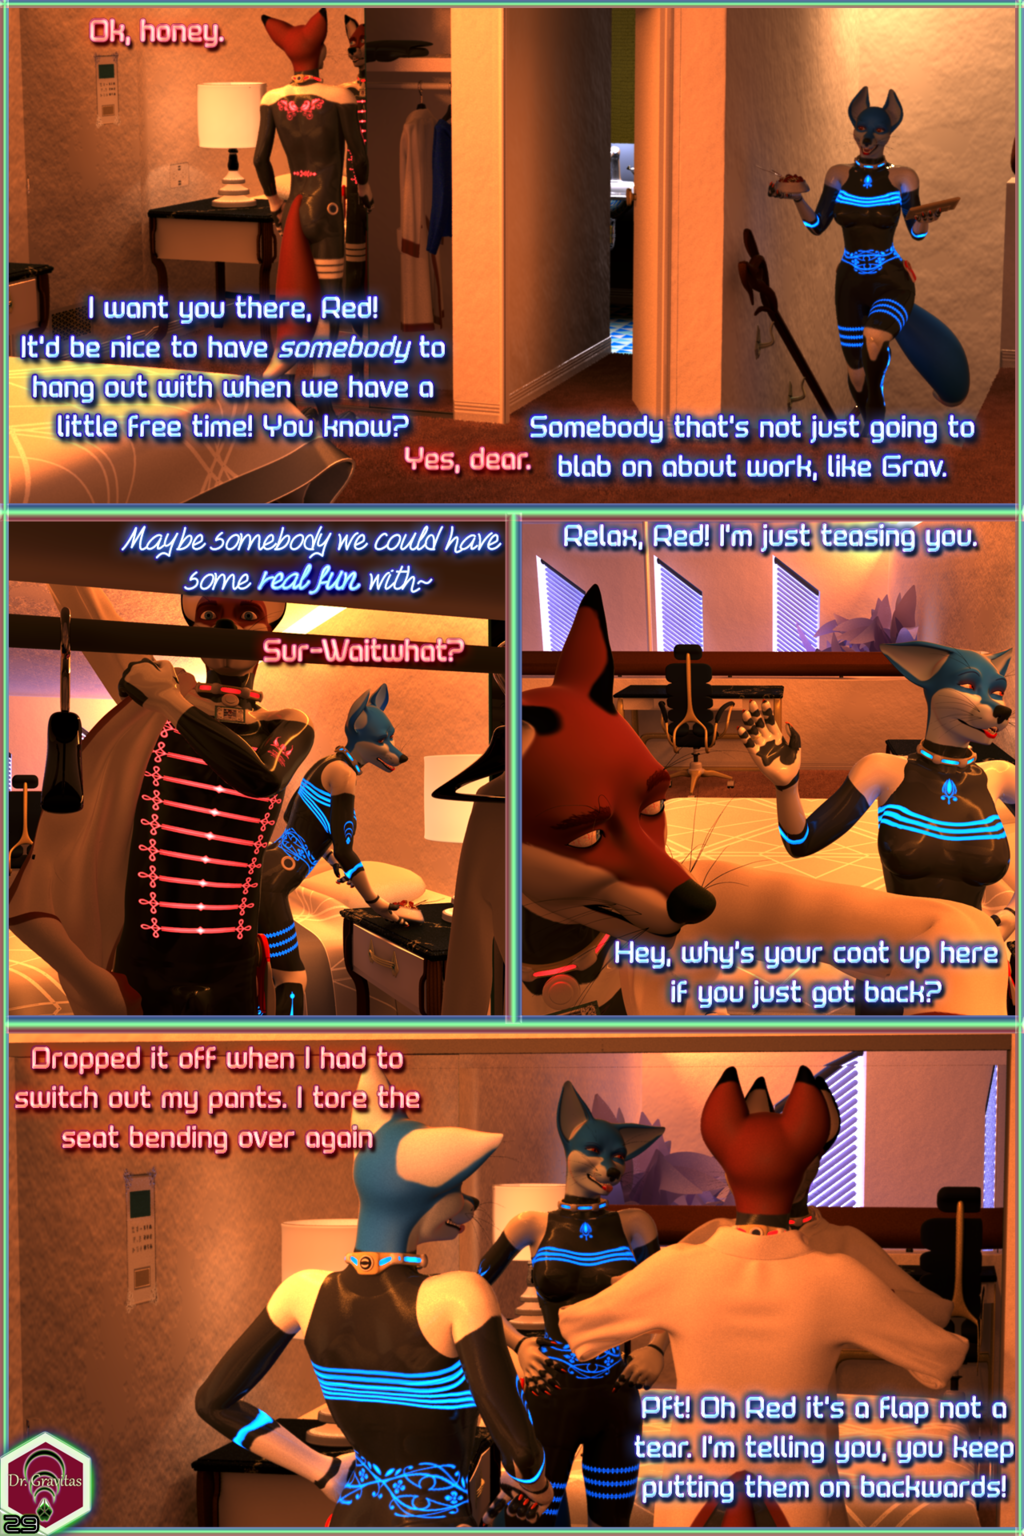 Flames | Page 29